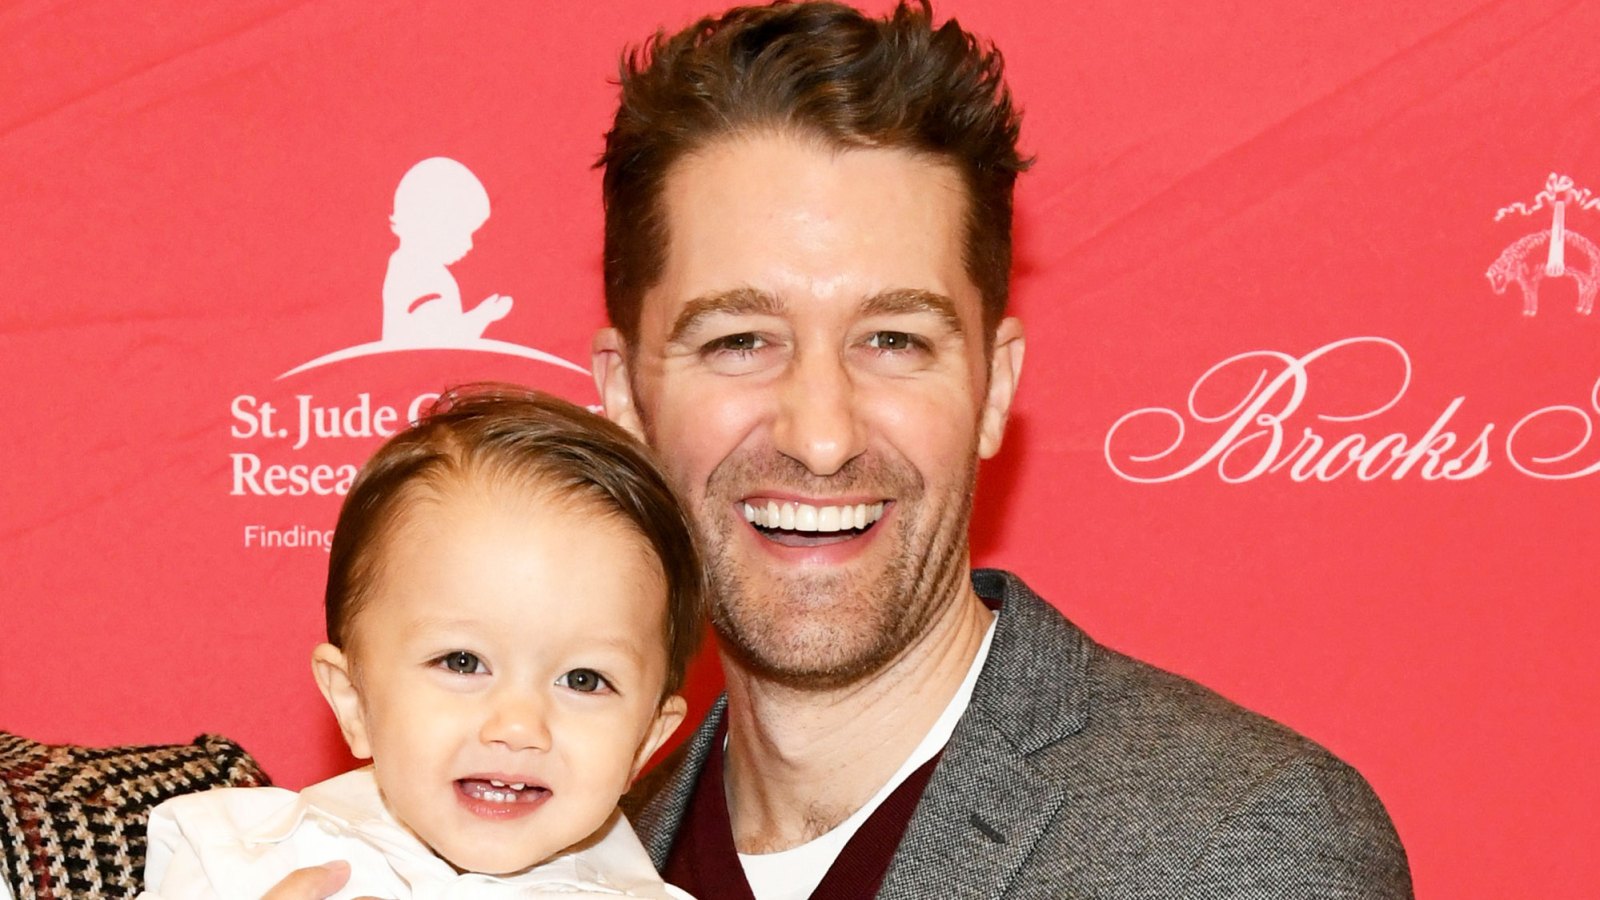 Matthew Morrison Reveals When He’ll Let His Son Watch Him ‘in His Prime’ on ‘Glee’